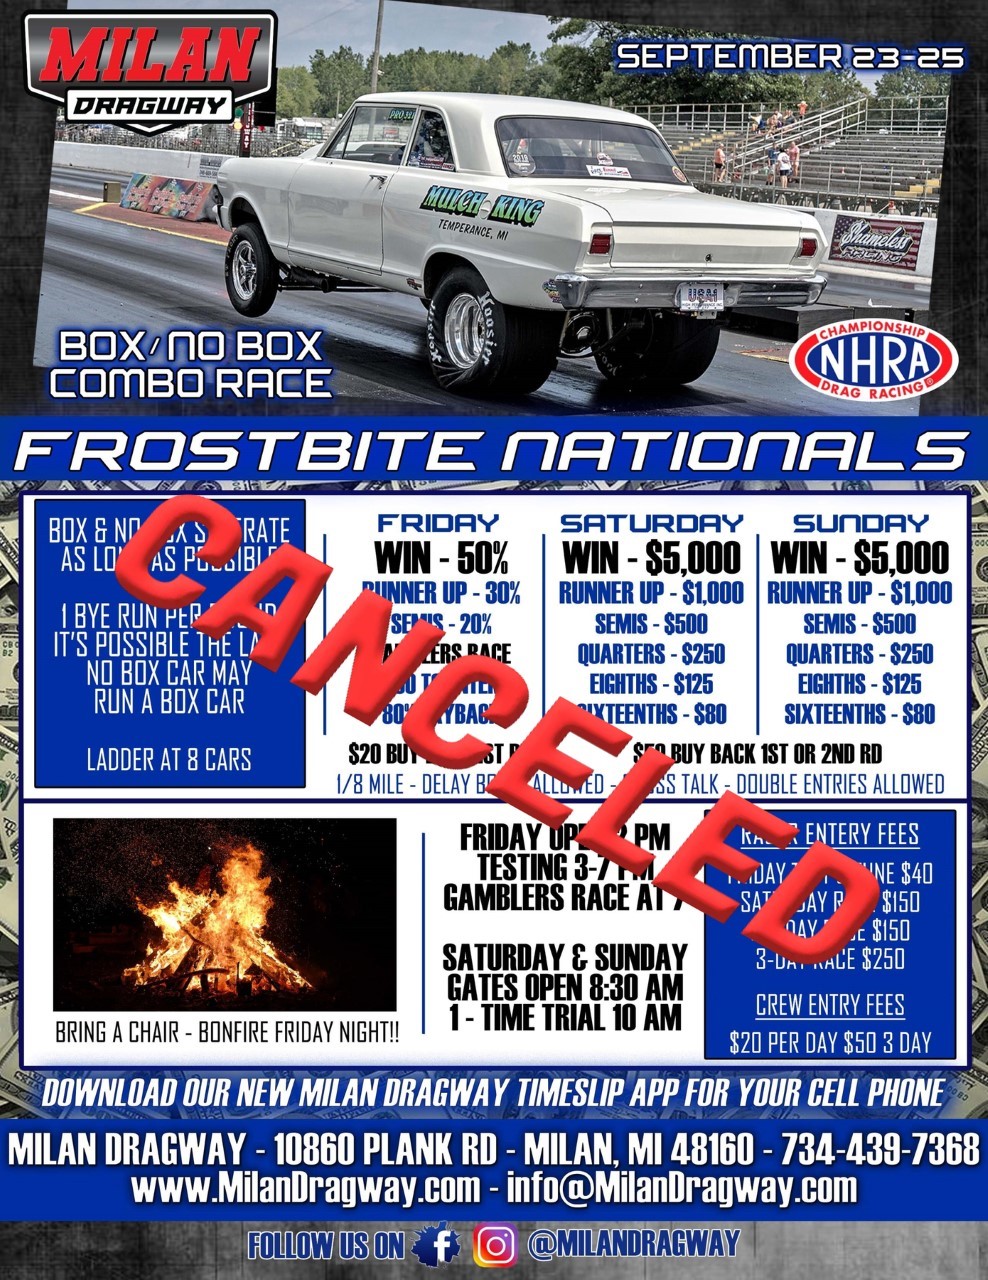 UPDATE: This Weeks Frostbite Nationals Have Been Cancelled